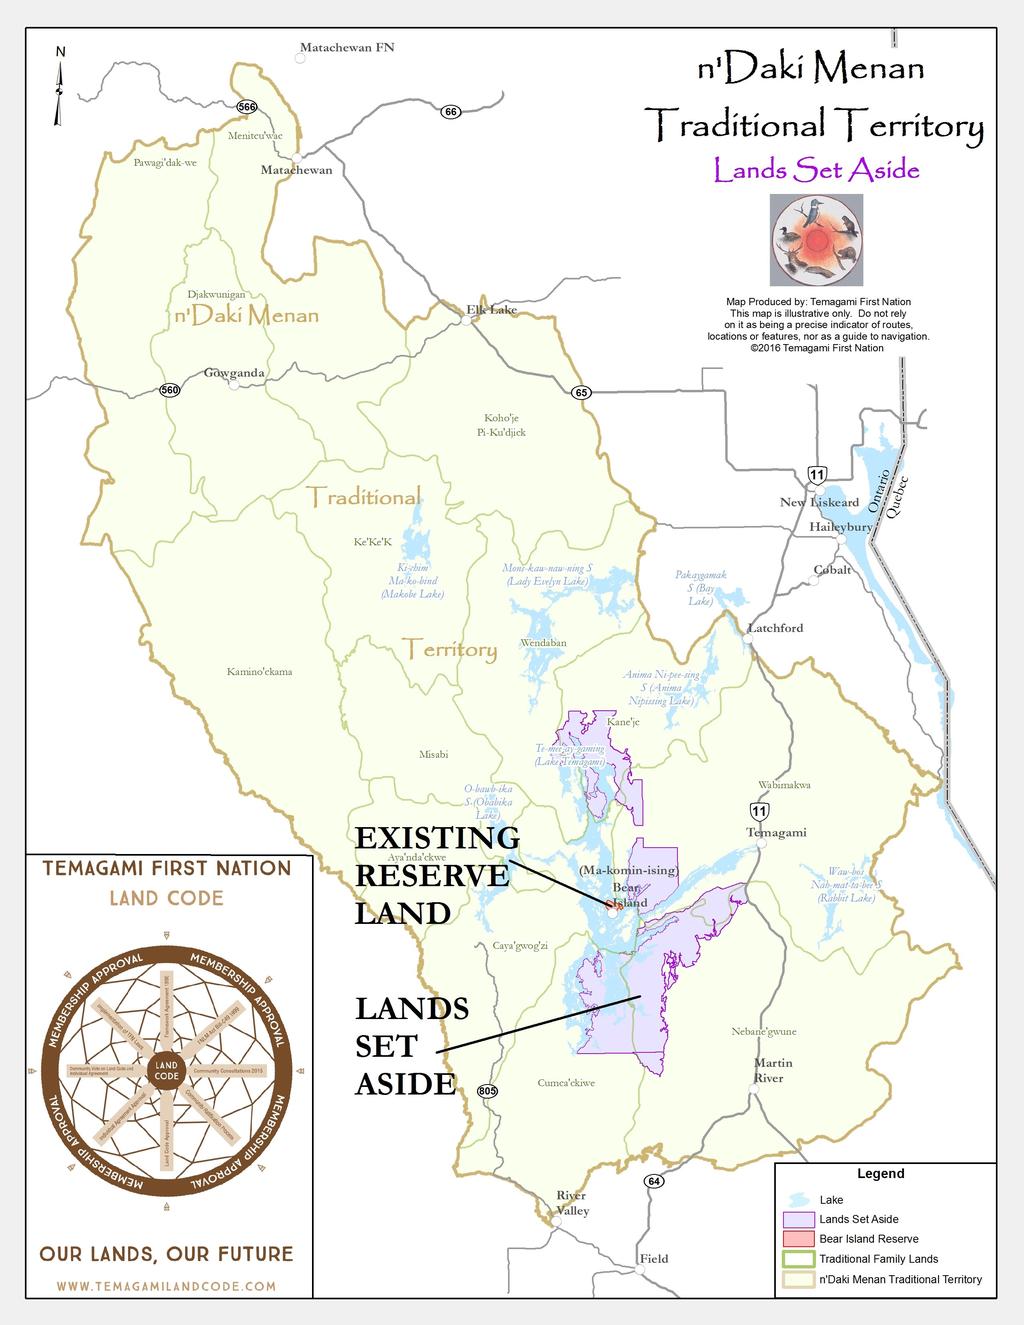 Temagami First Nation - Land Code News LANDS SET ASIDE Pending the outcome of the Land Claim these lands